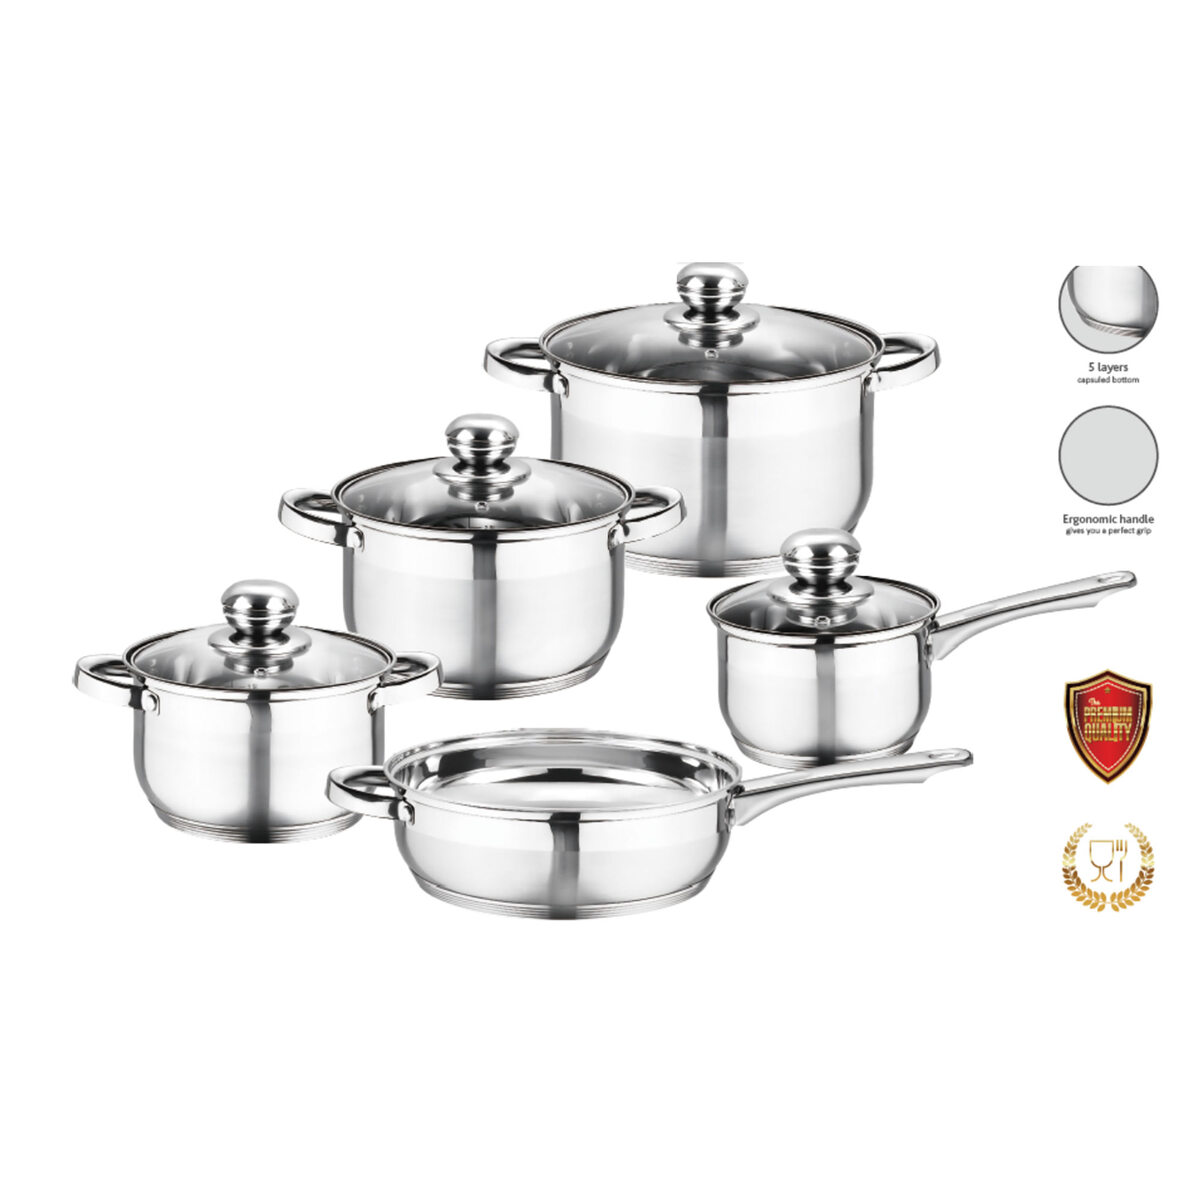 Schon Haus Stainless Steel Cookware Set 9Pc